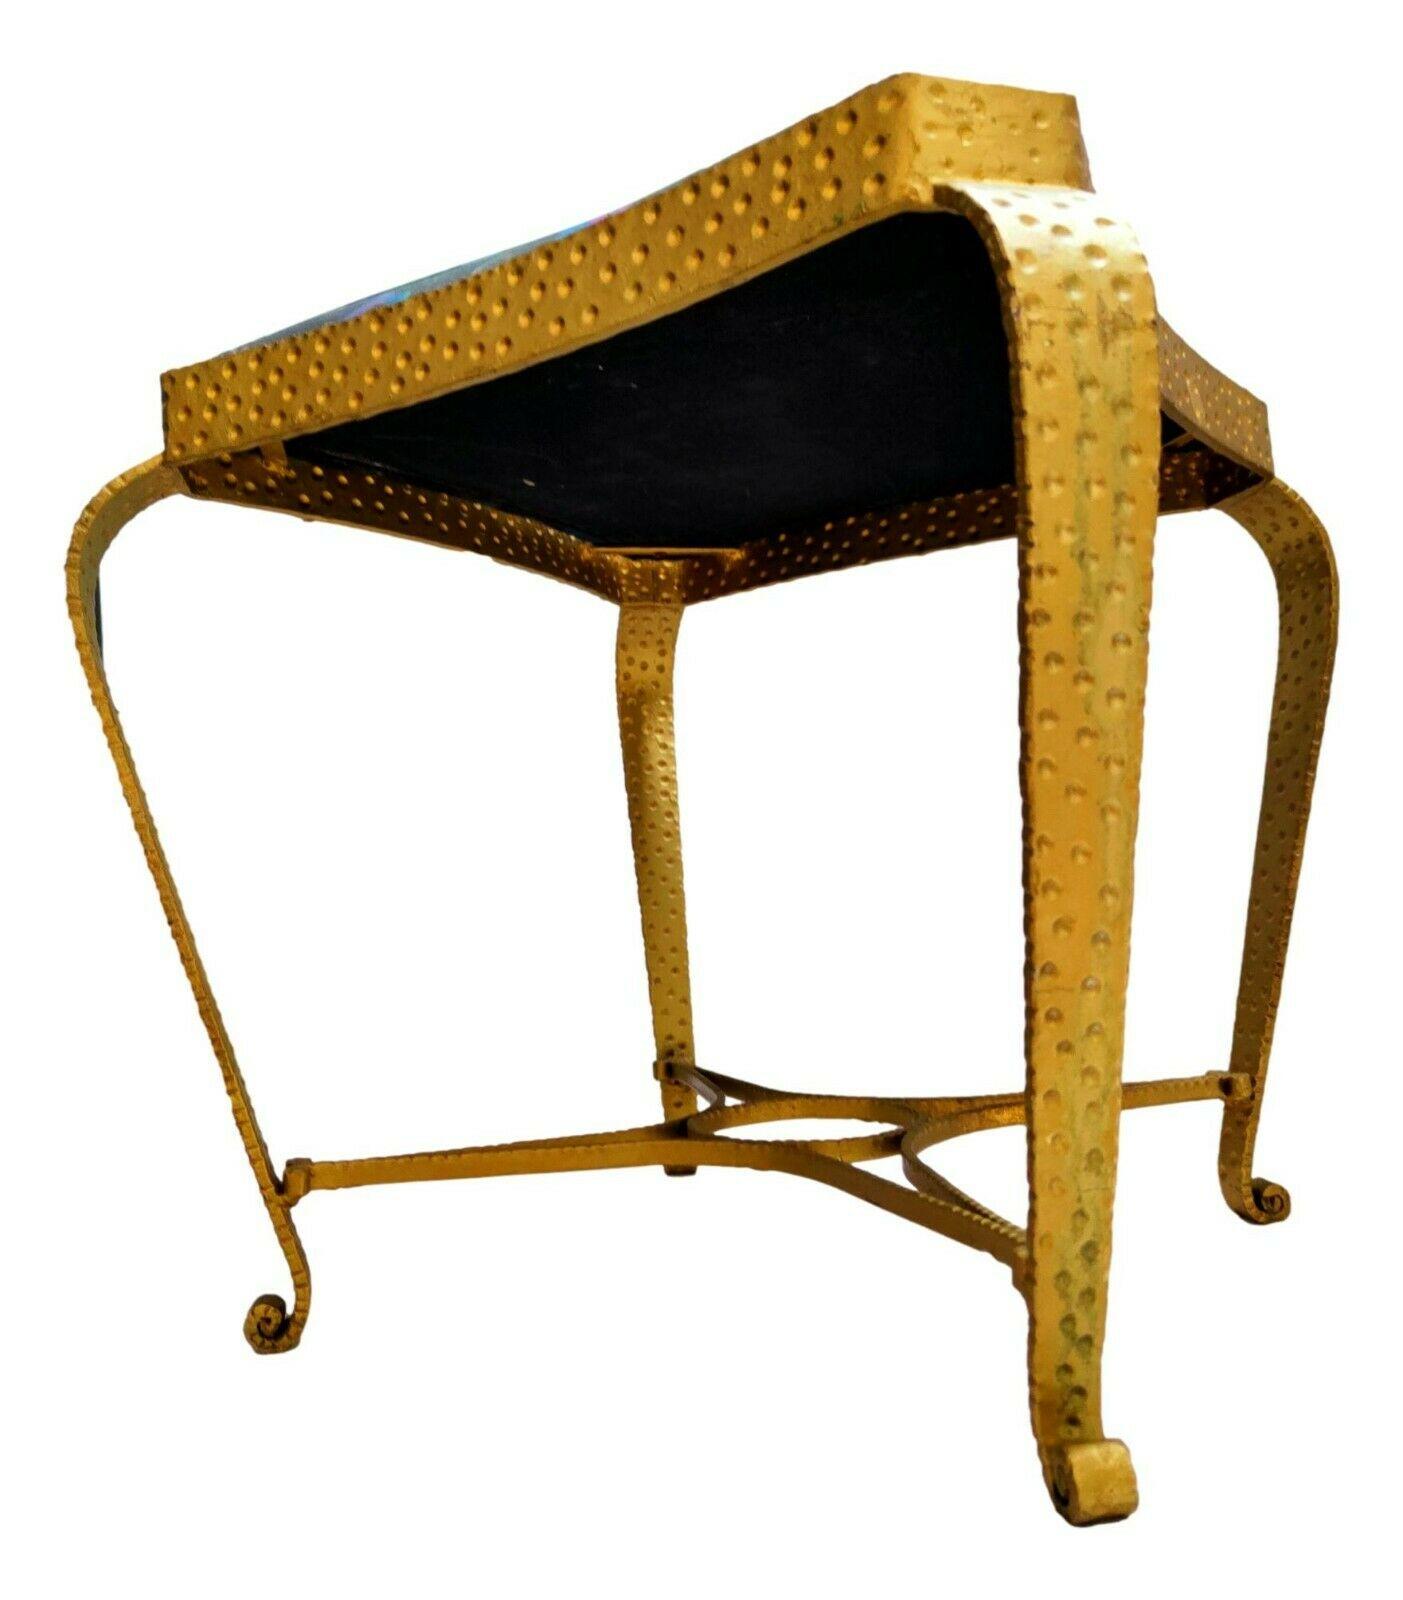 Original 1950s stool, design Pier Luigi Colli, made of worked metal and gold lacquered with cotton seat

It measures 42 cm on the side, height 41 cm.

In very good condition, as shown in the photos, with no obvious signs of age and use.